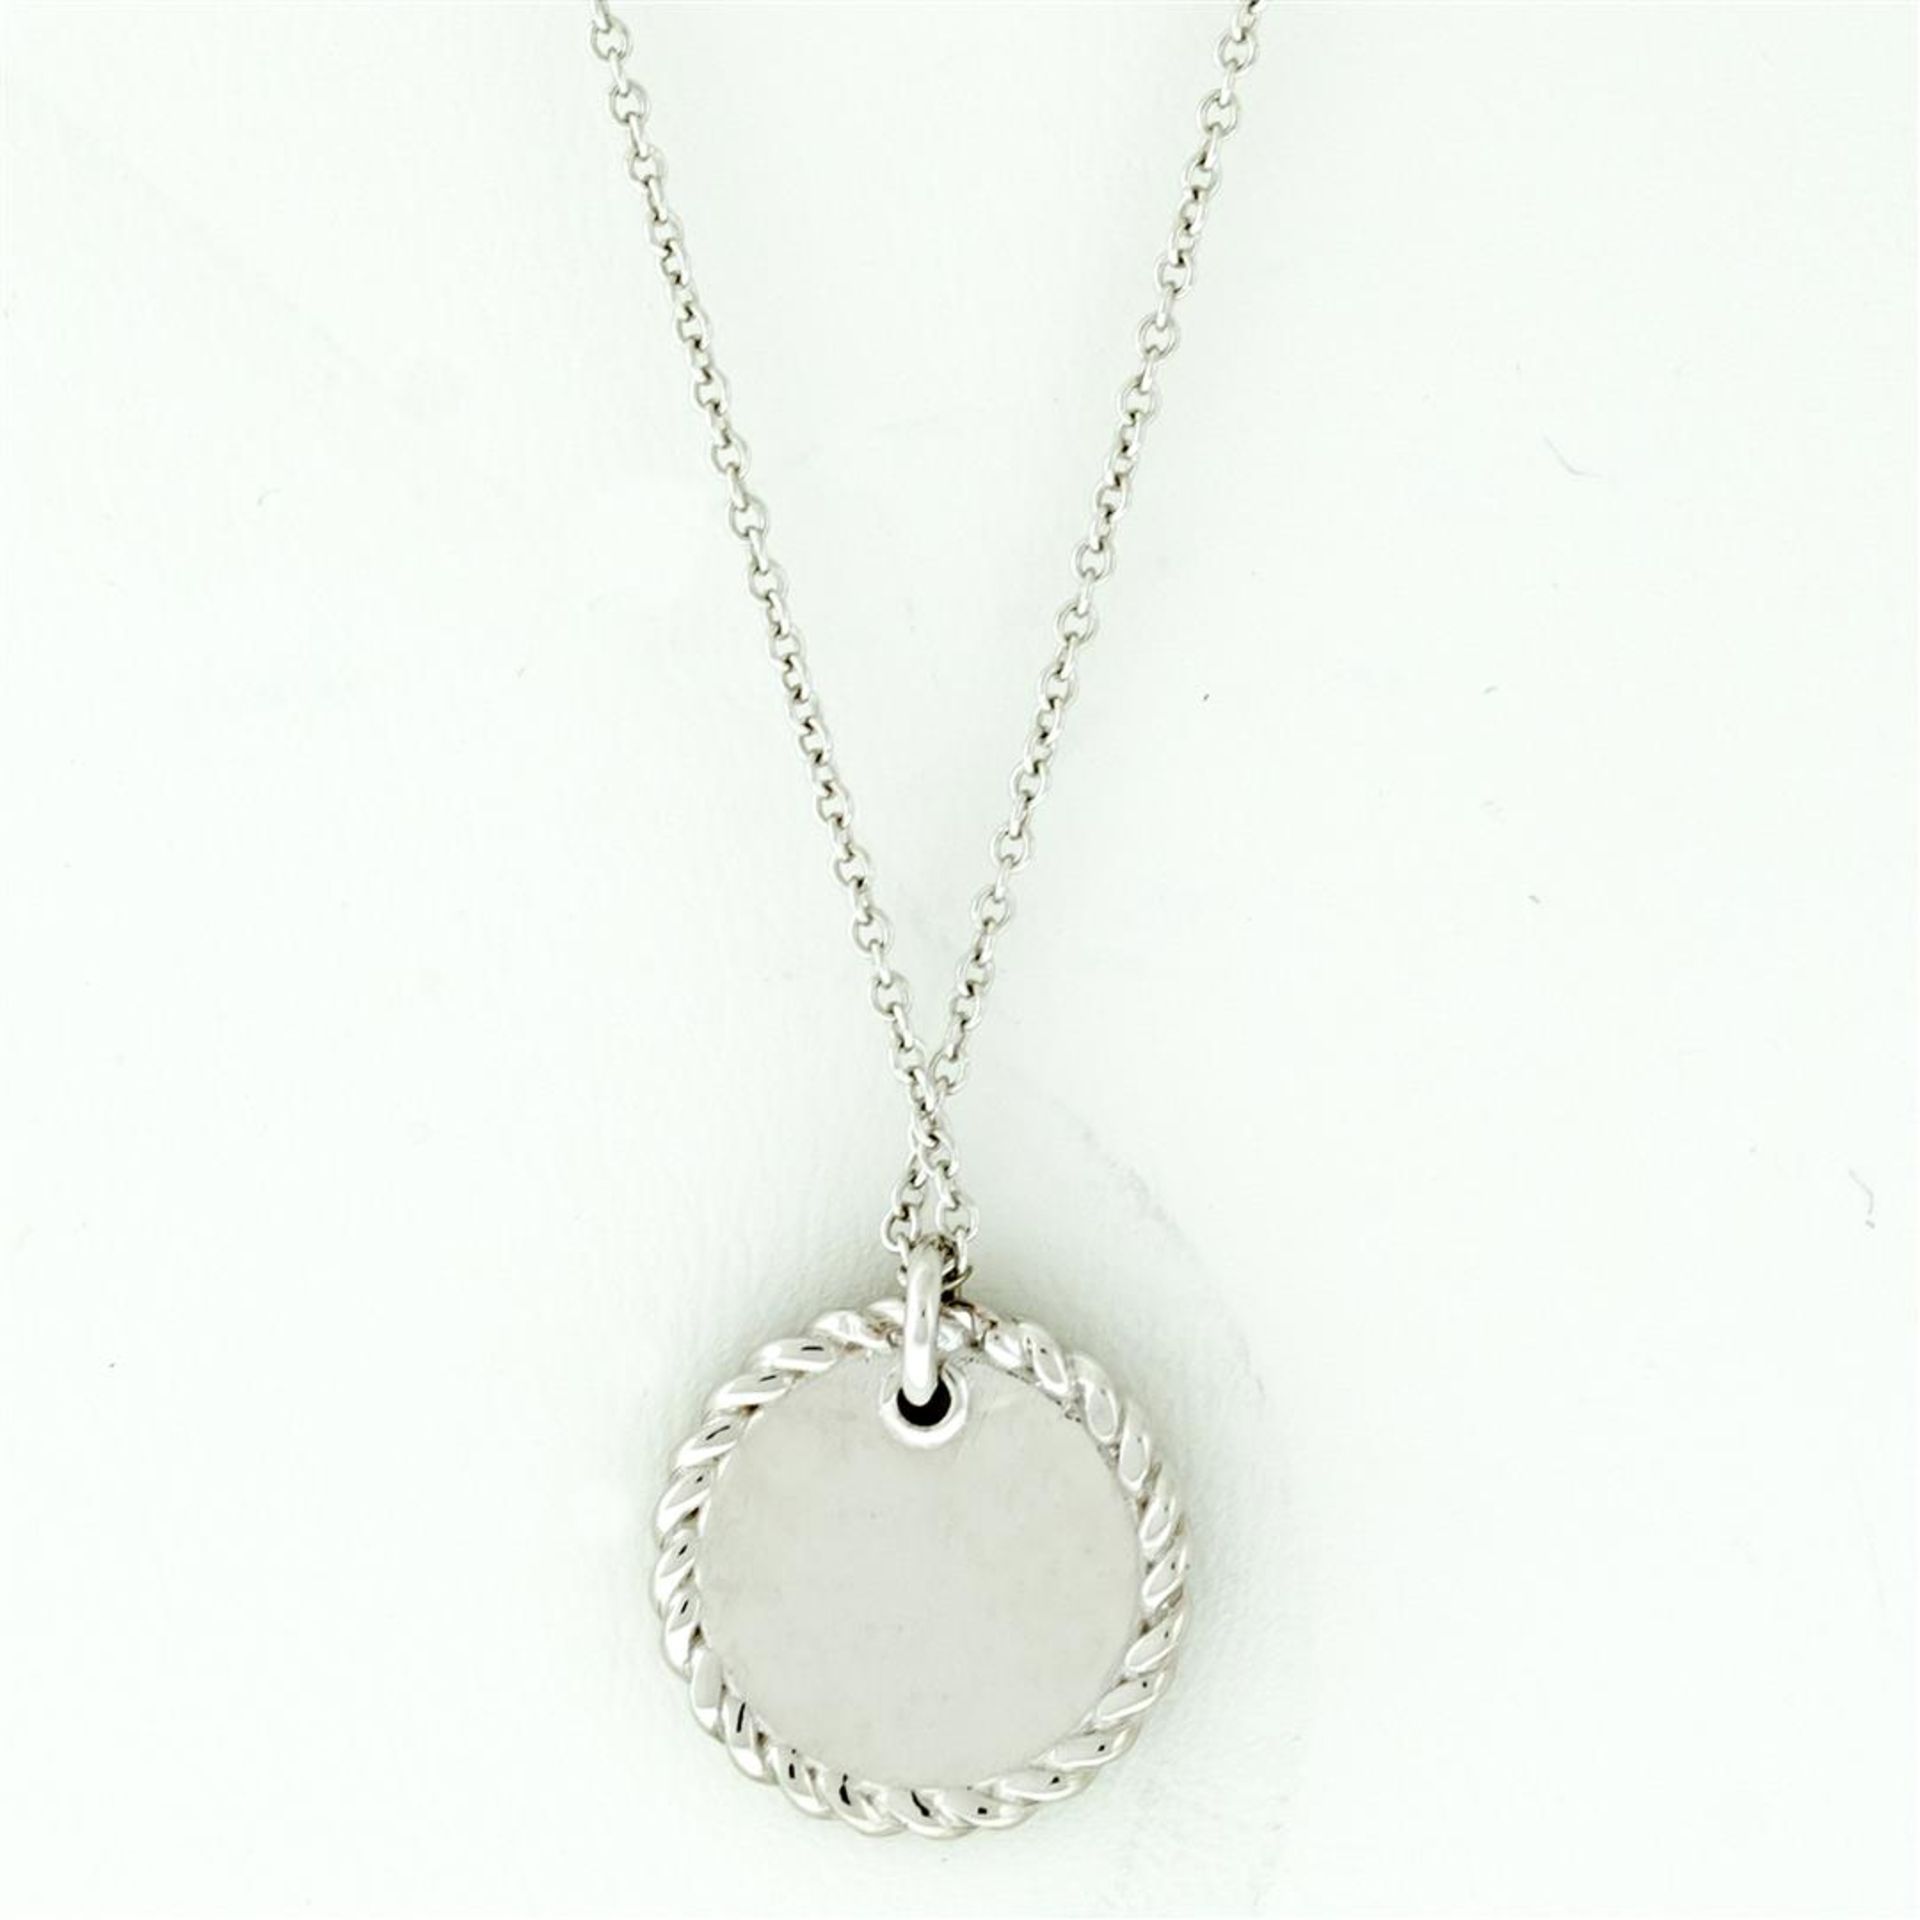 New 18k White Gold Diamond Cable Pendant with with 18K White Gold Chain - Image 7 of 7